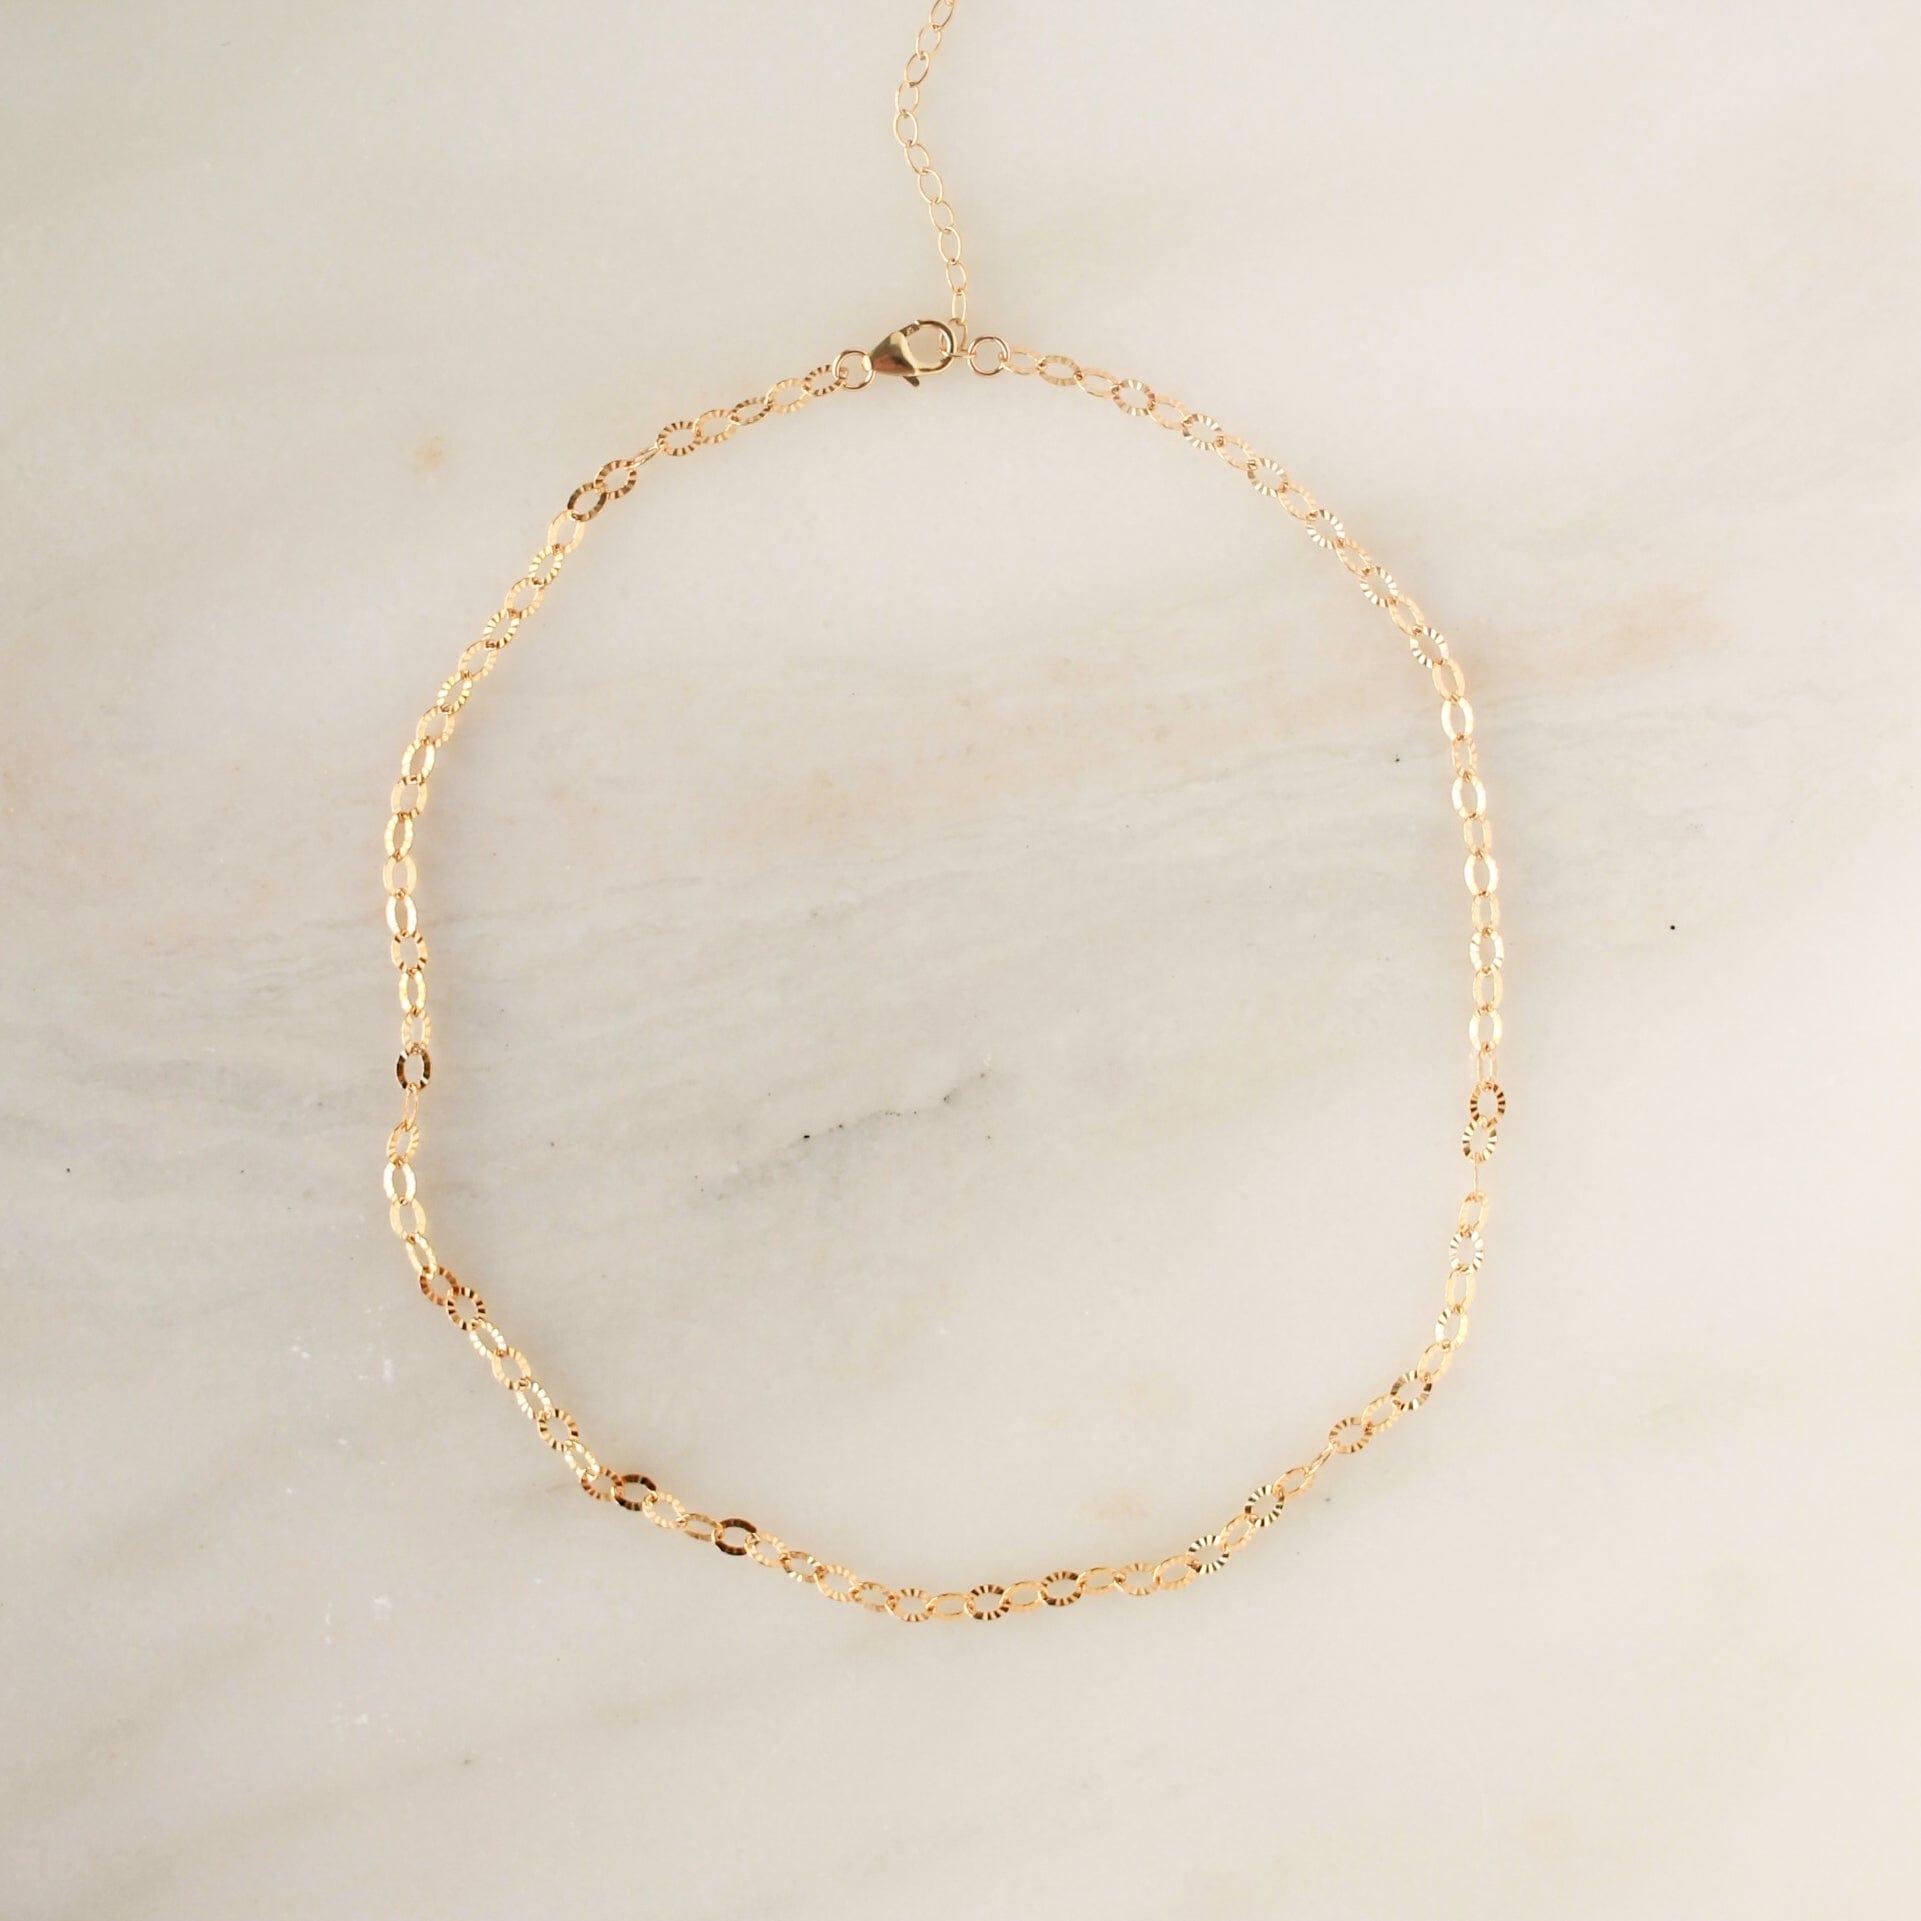 Sunburst Chain Necklace - Nolia Jewelry - Meaningful + Sustainably Handcrafted Jewelry